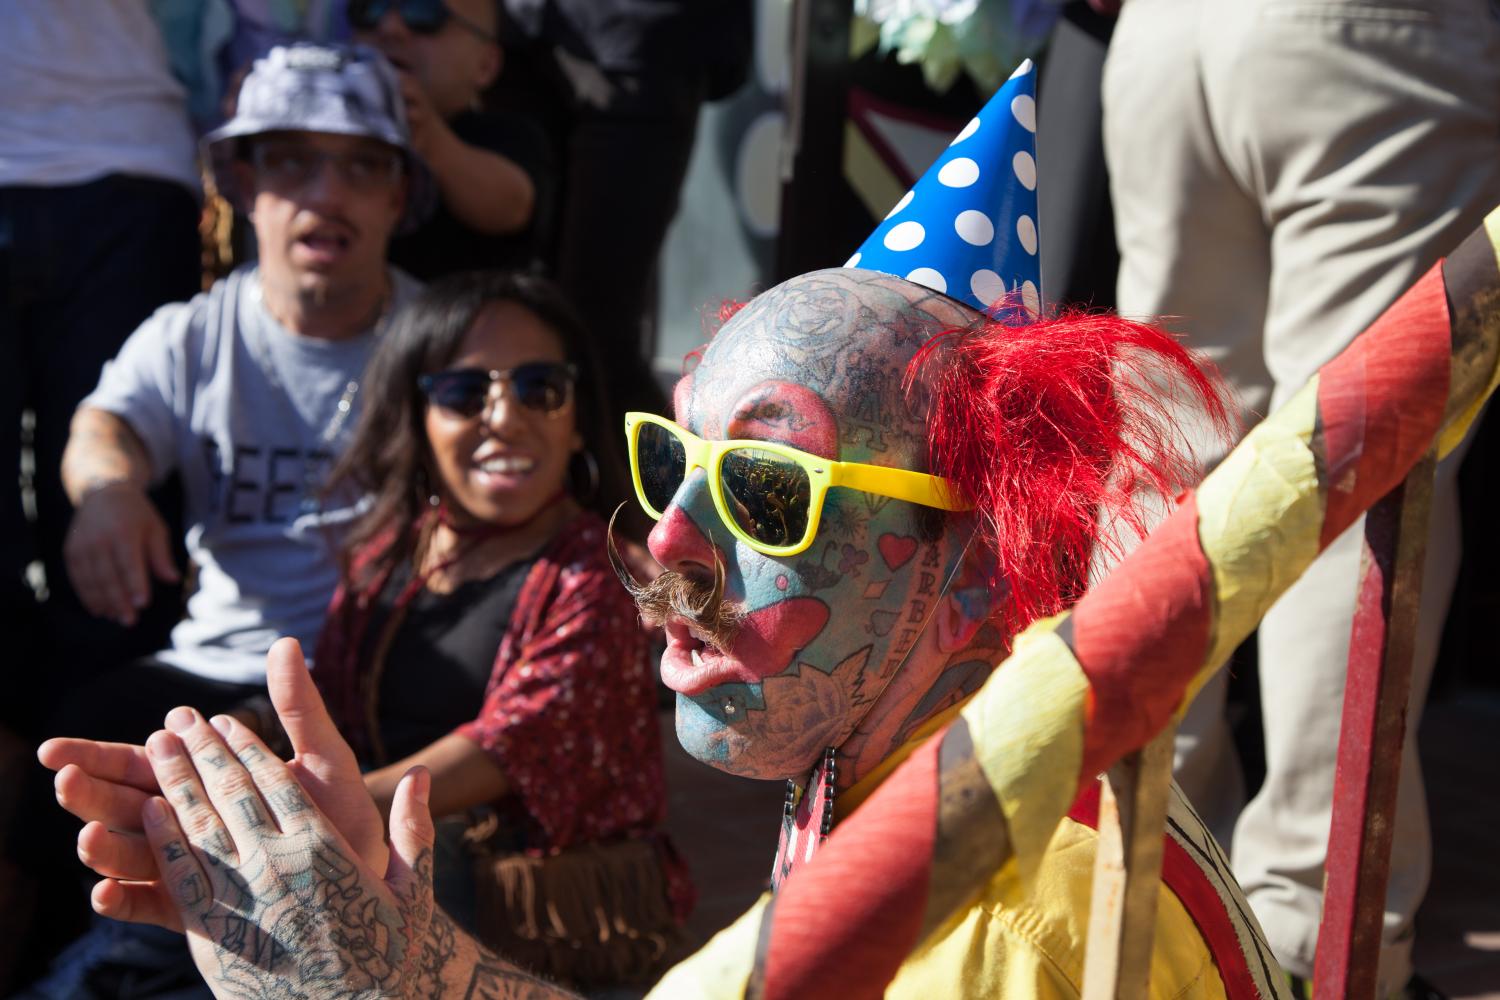  Richie The Barber applauds along with the crowd after Jessa The Bearded Lady gets married on the front steps of The Venice Beach Freakshow, by Todd Ray, owner of the Freakshow on Sunday, April 30, 2017 in the Venice Neighborhood of Los Angeles, Cali